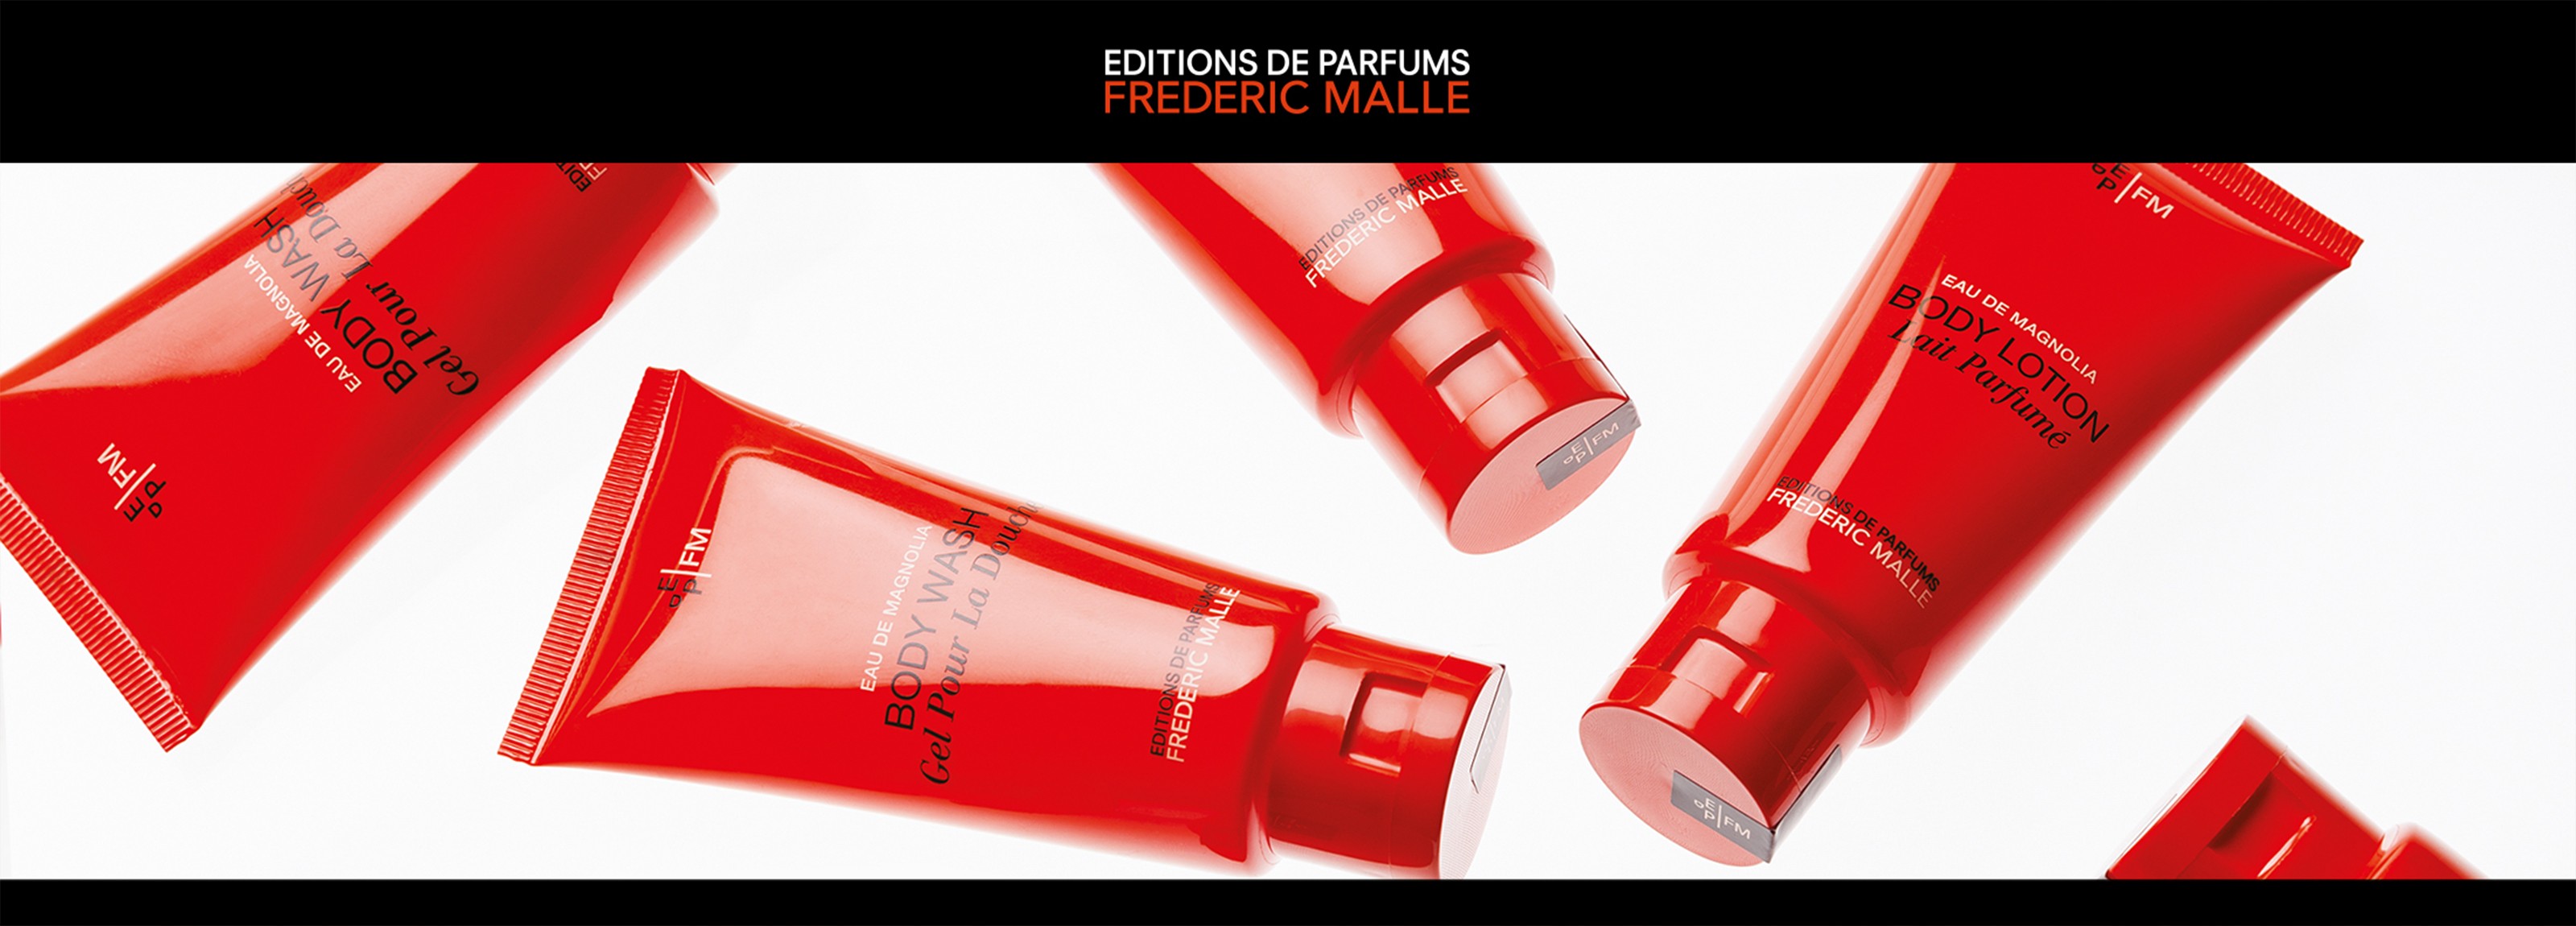 frederic malle bathroom products